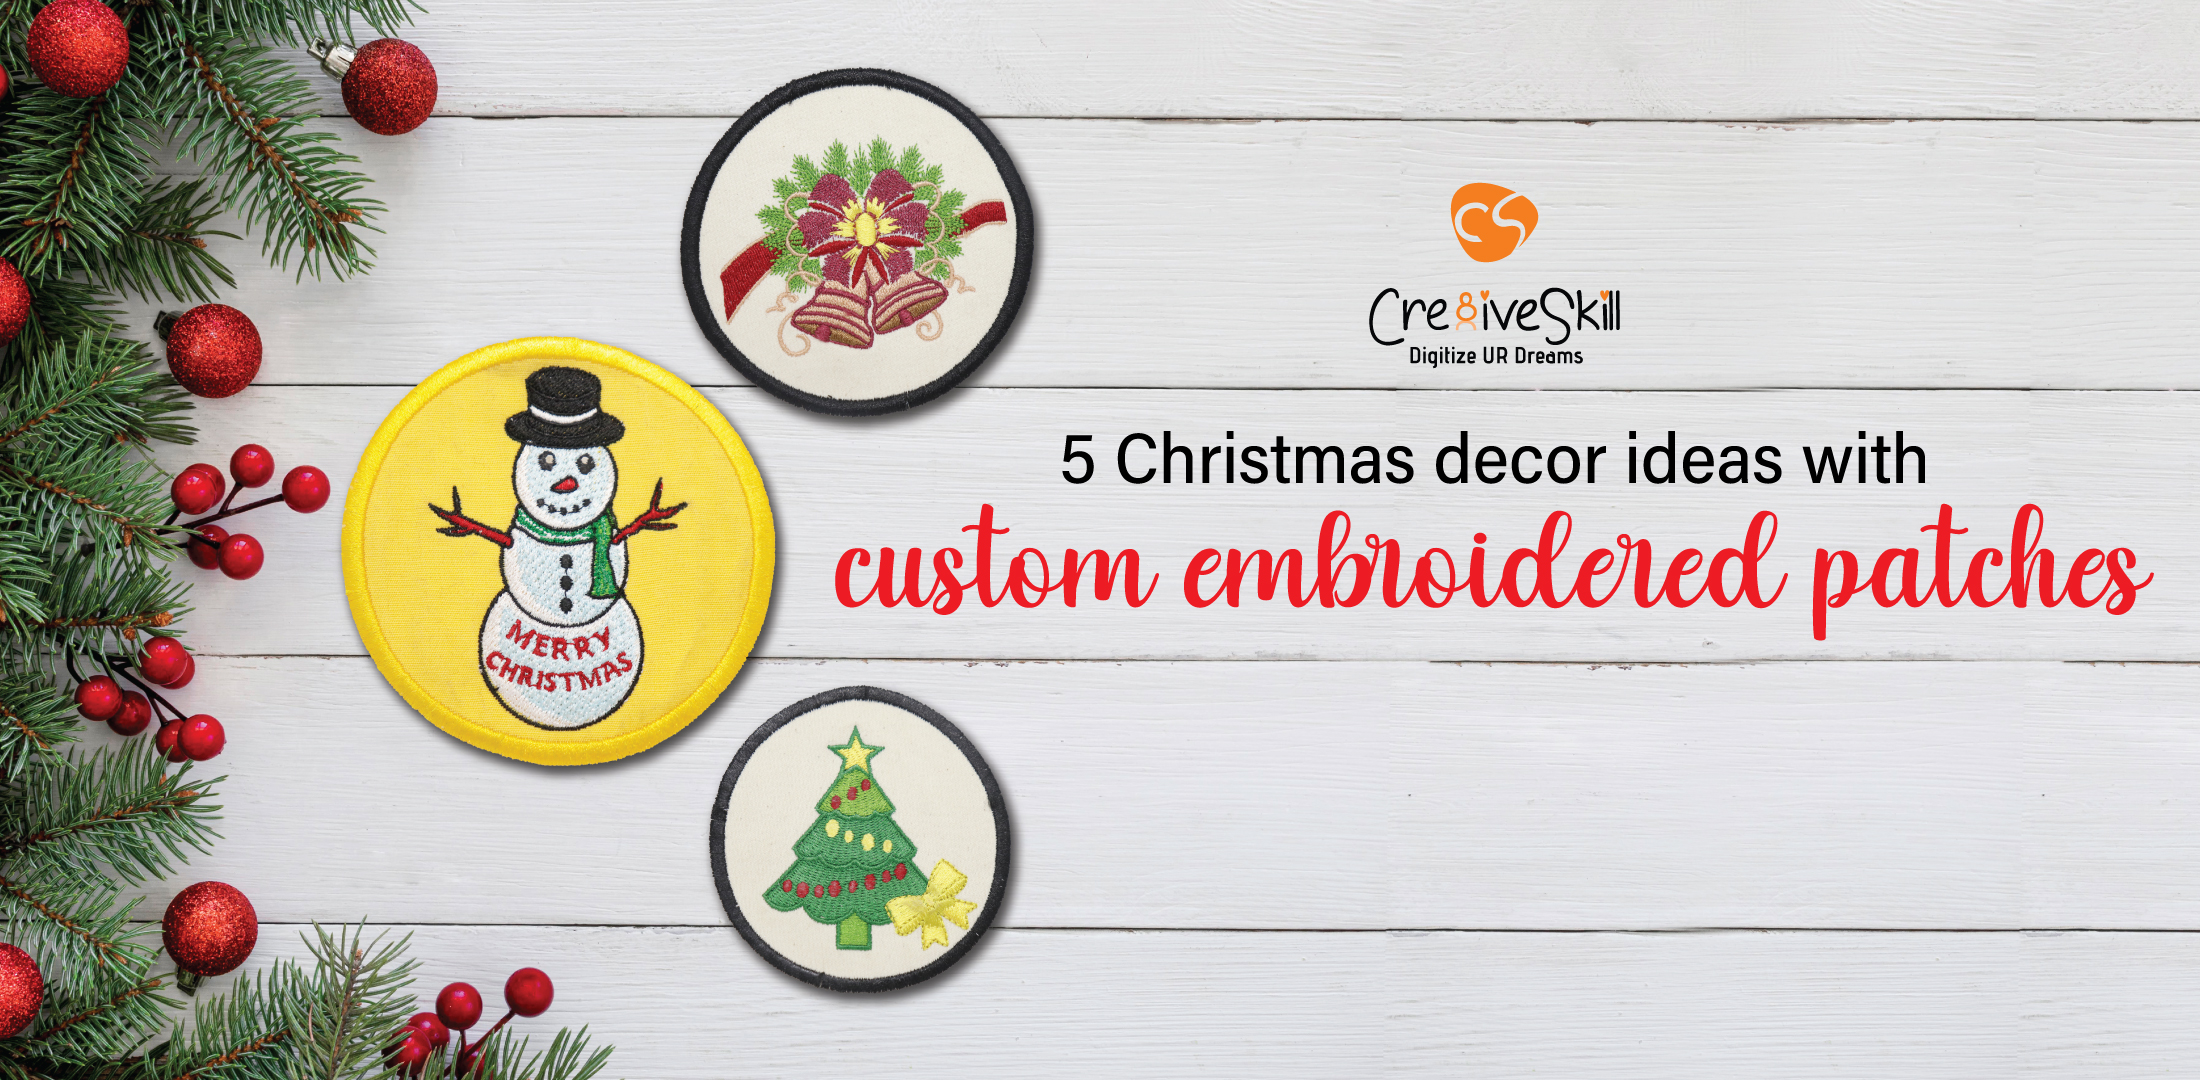 5 Christmas decor ideas with custom embroidered patches - Cre8iveSkill